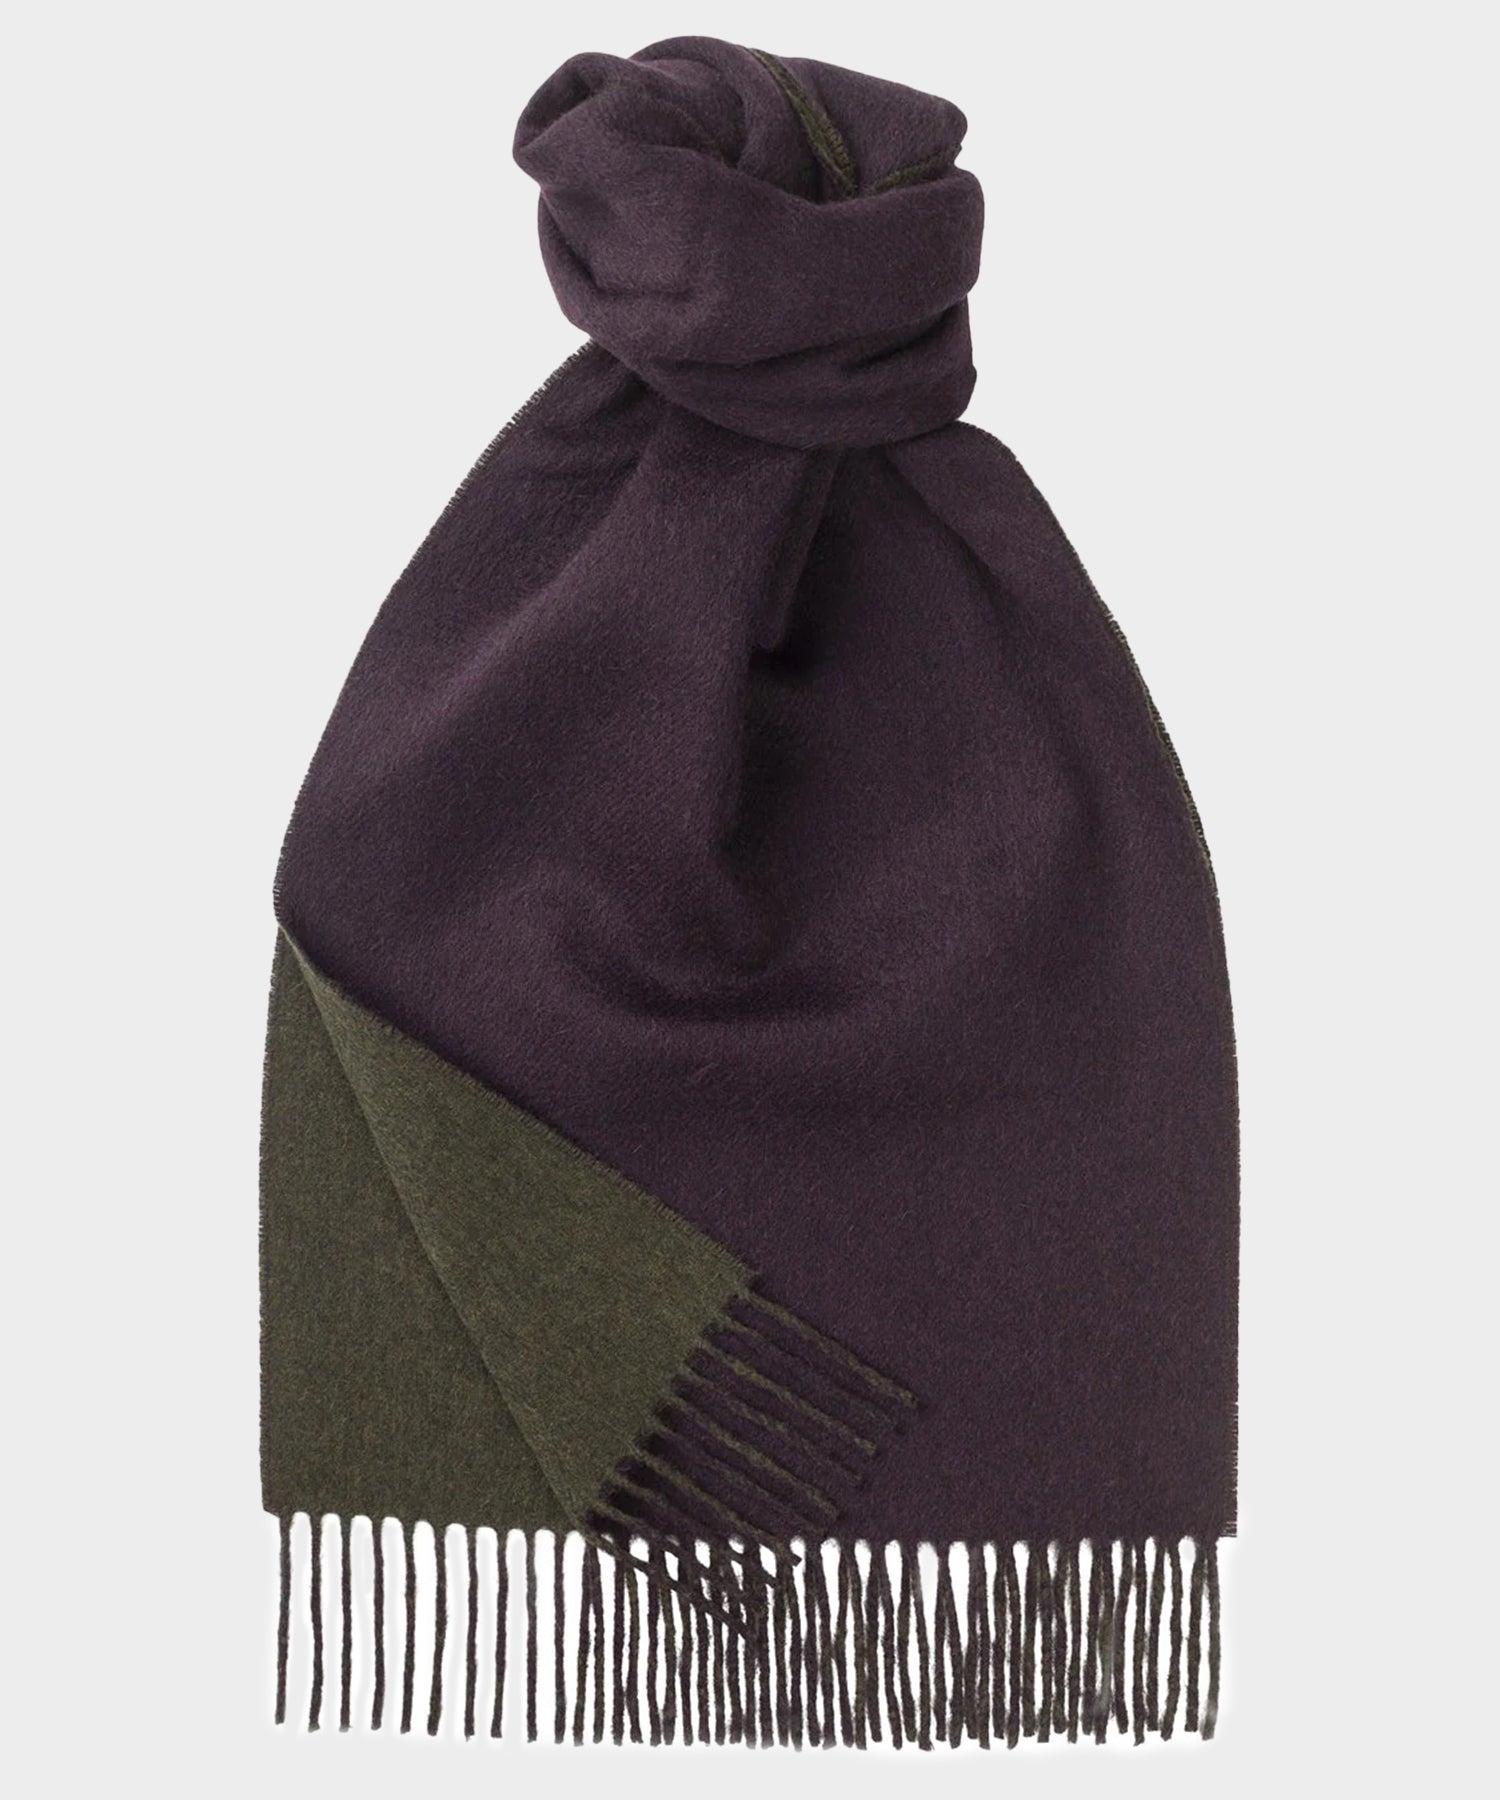 Todd Snyder x Joshua Ellis Double Faced Scarf in Muscat x Loden